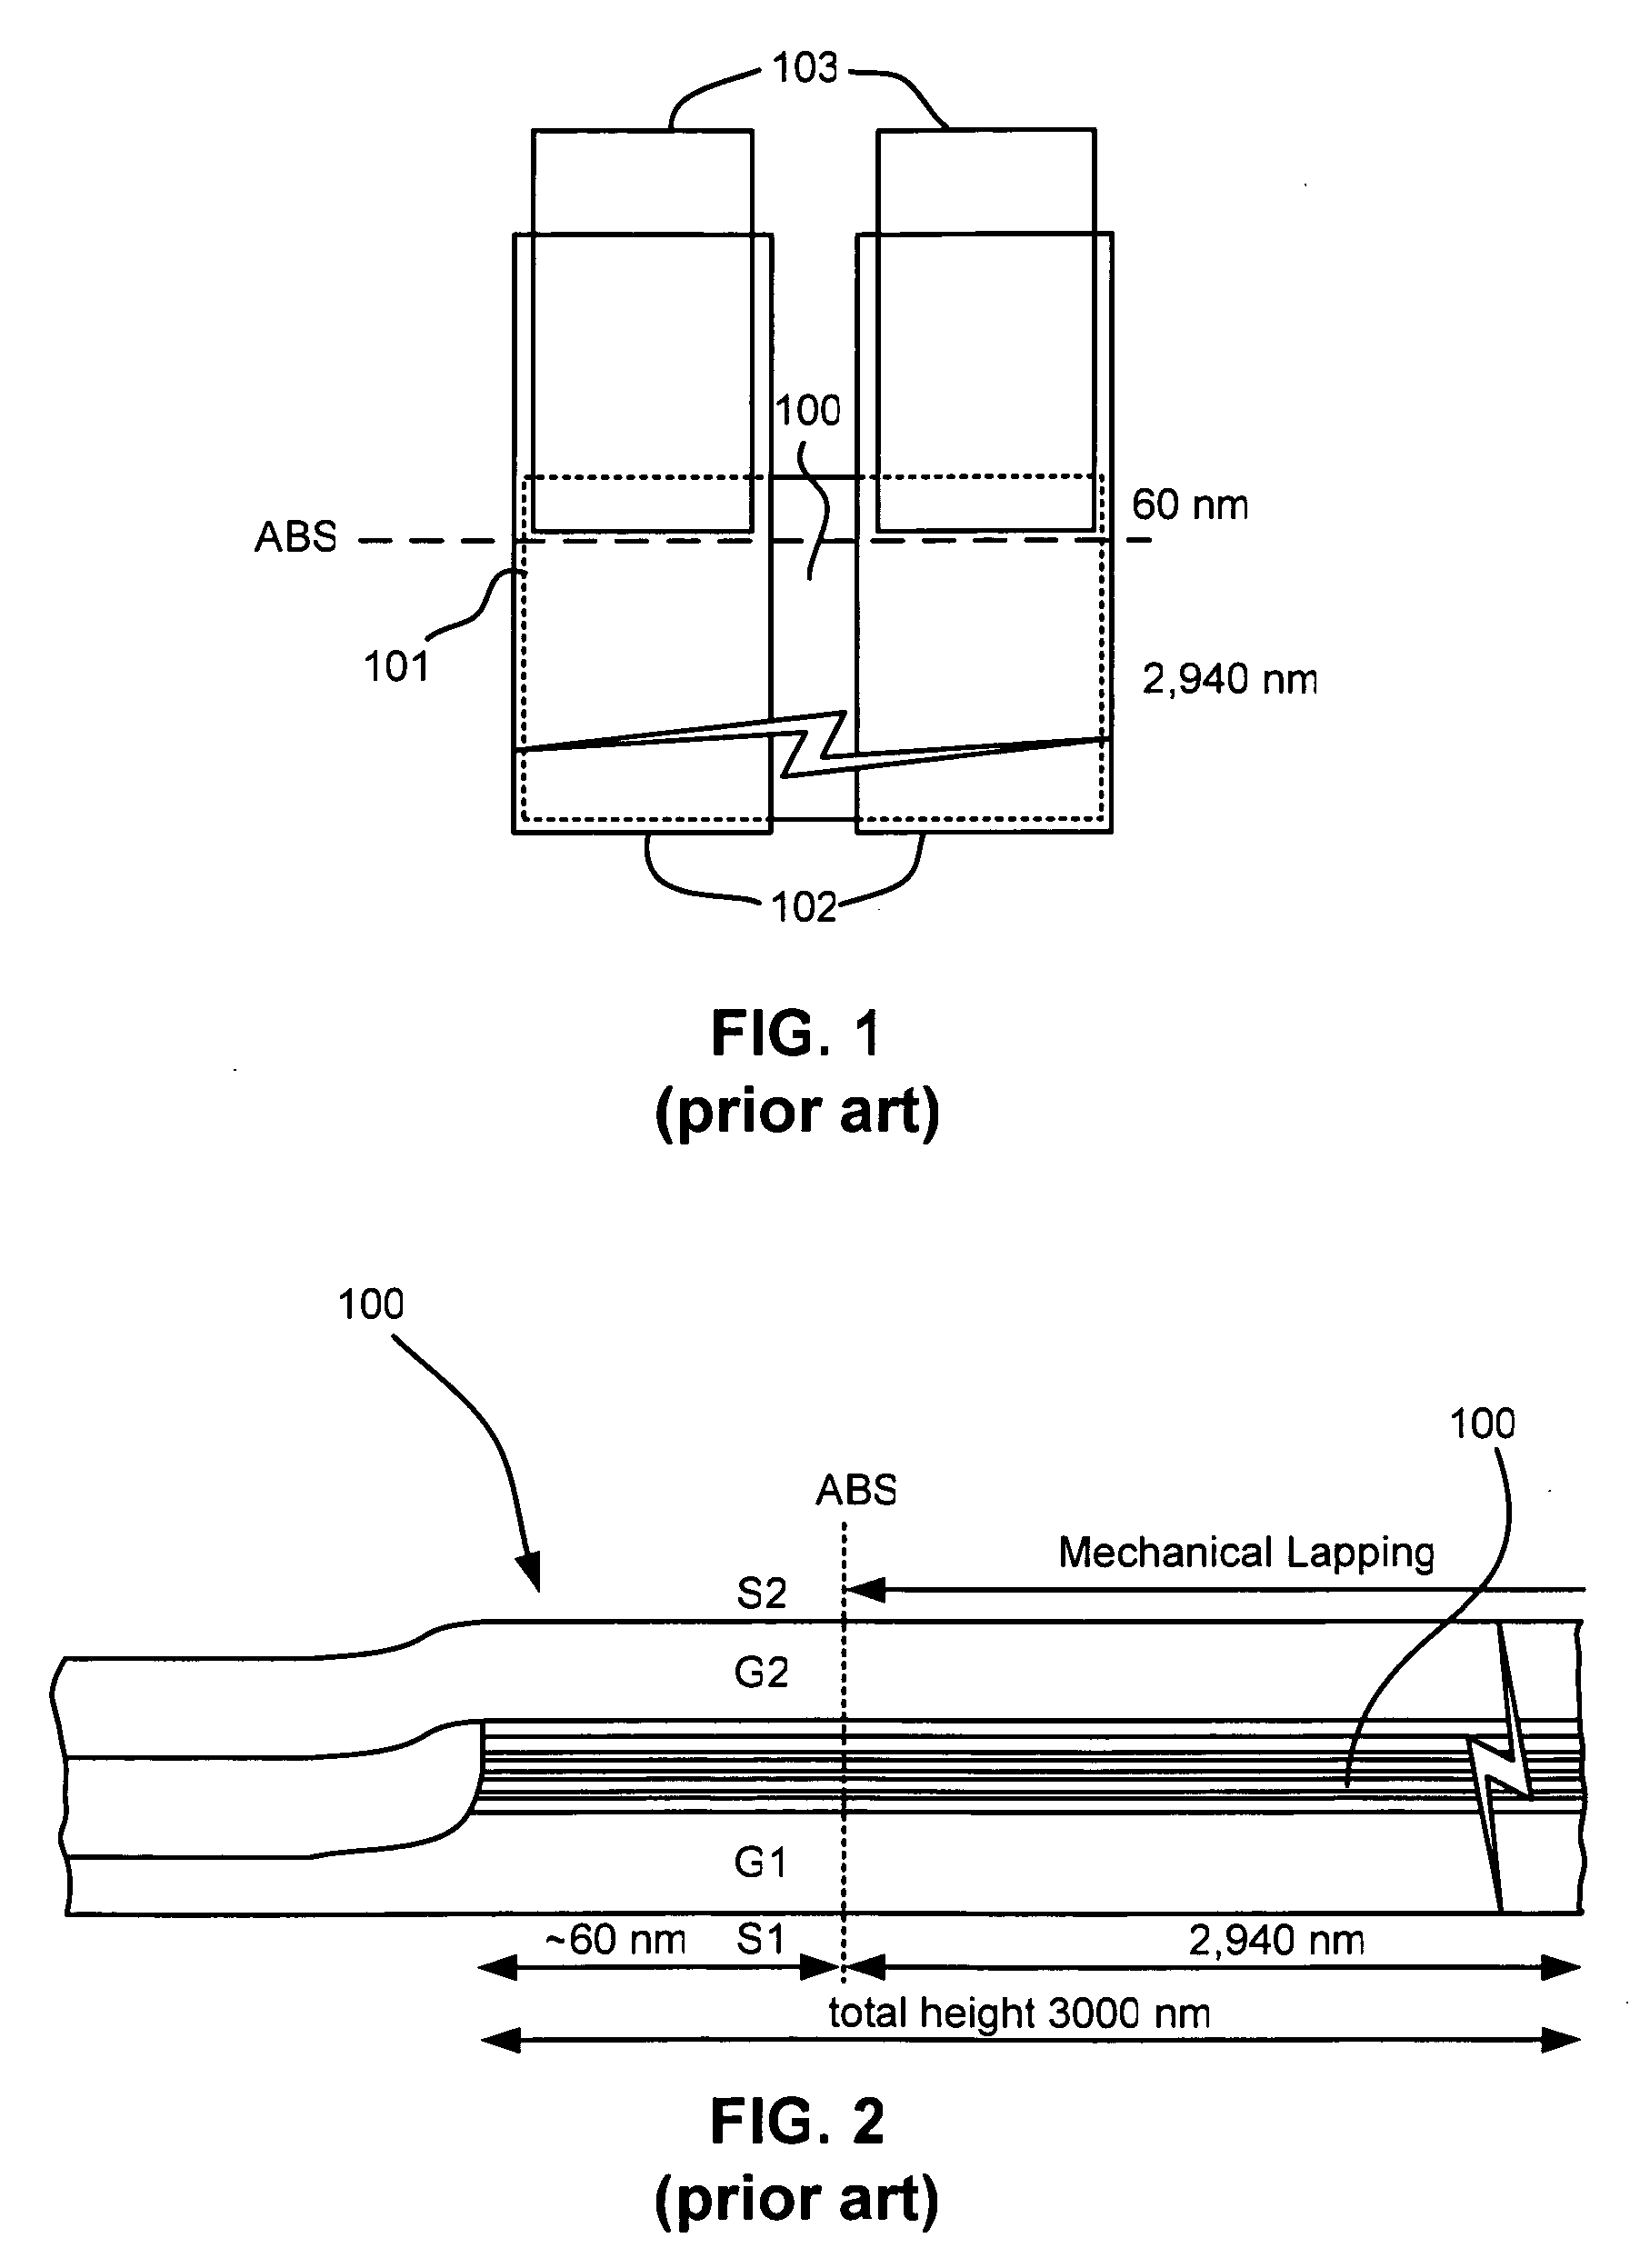 Method of forming an embedded read element